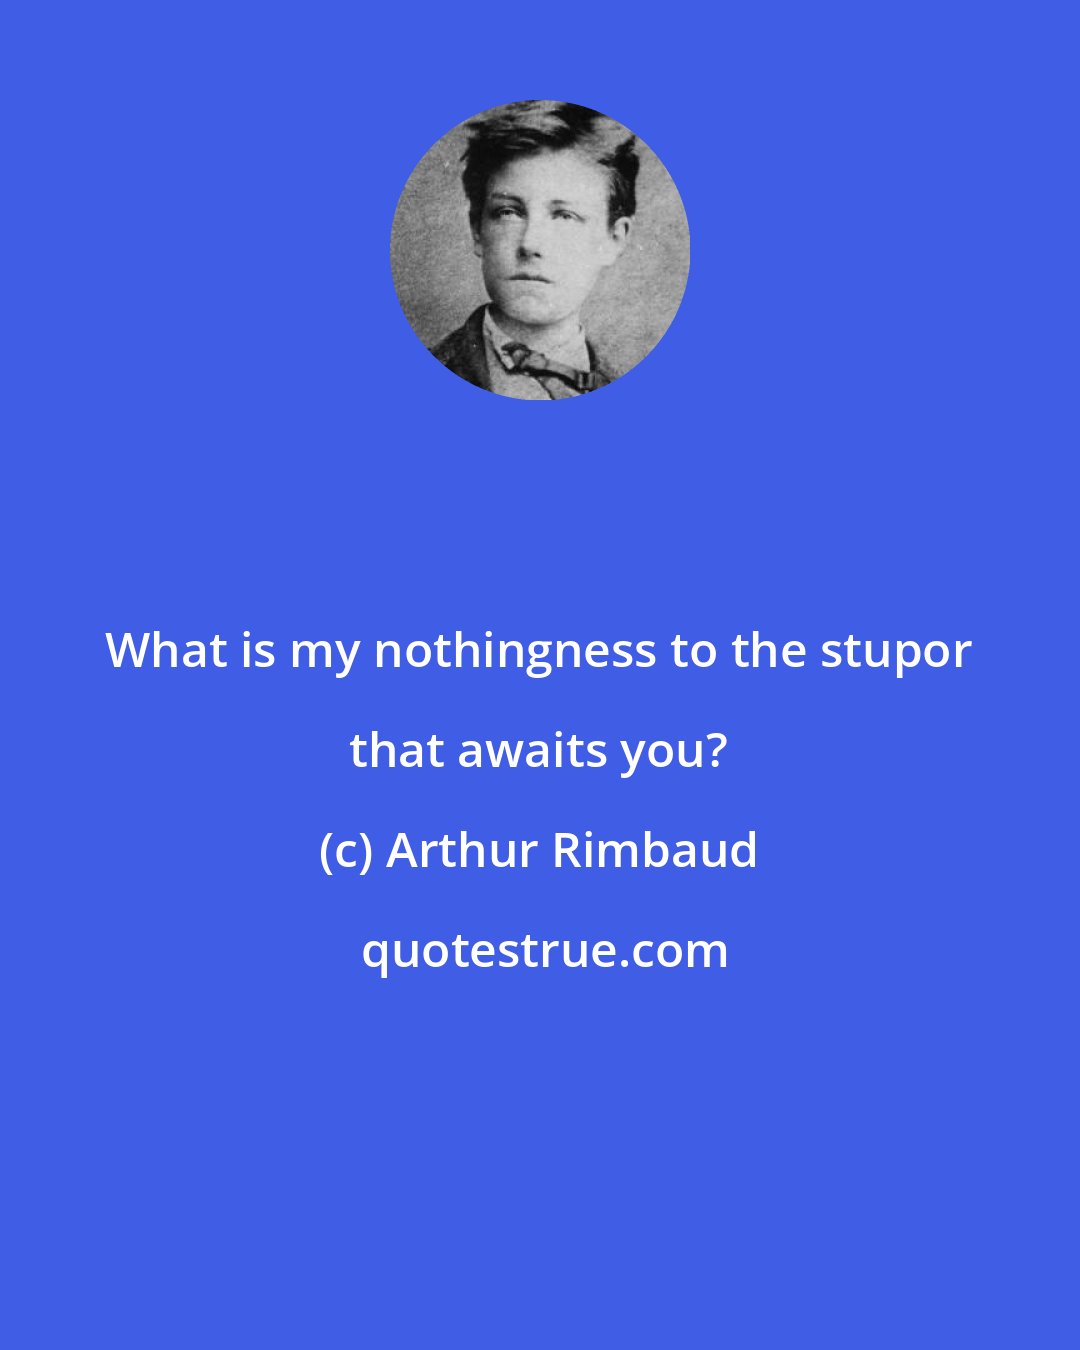 Arthur Rimbaud: What is my nothingness to the stupor that awaits you?